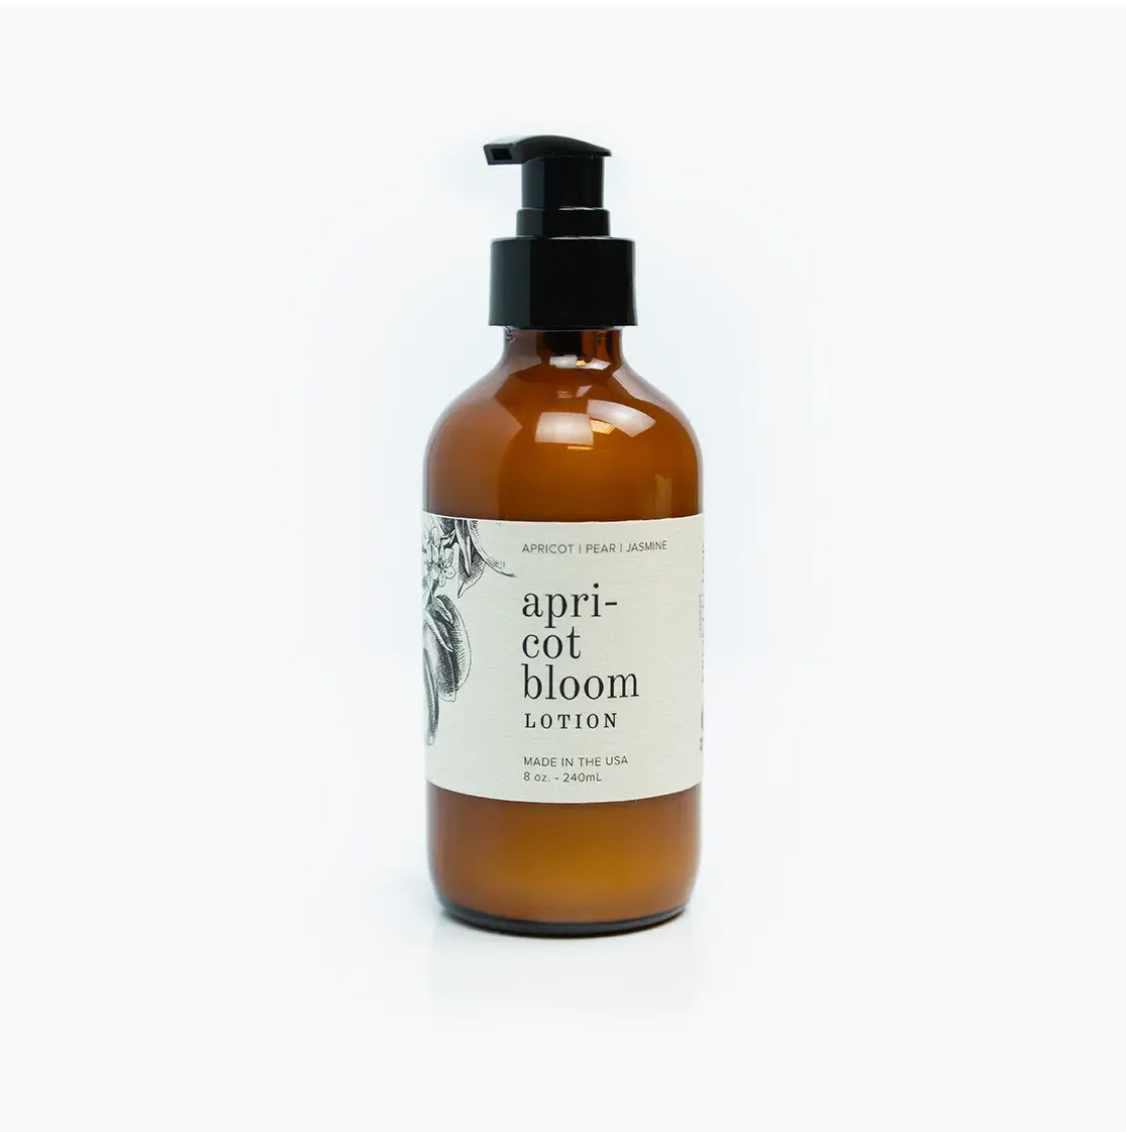 Amber glass bottle with a black pump containing Faire&#39;s &quot;Apricot Bloom Lotion 8 oz.&quot; The label features an artistic floral sketch and text noting the product is made in Arizona. The background is plain white.